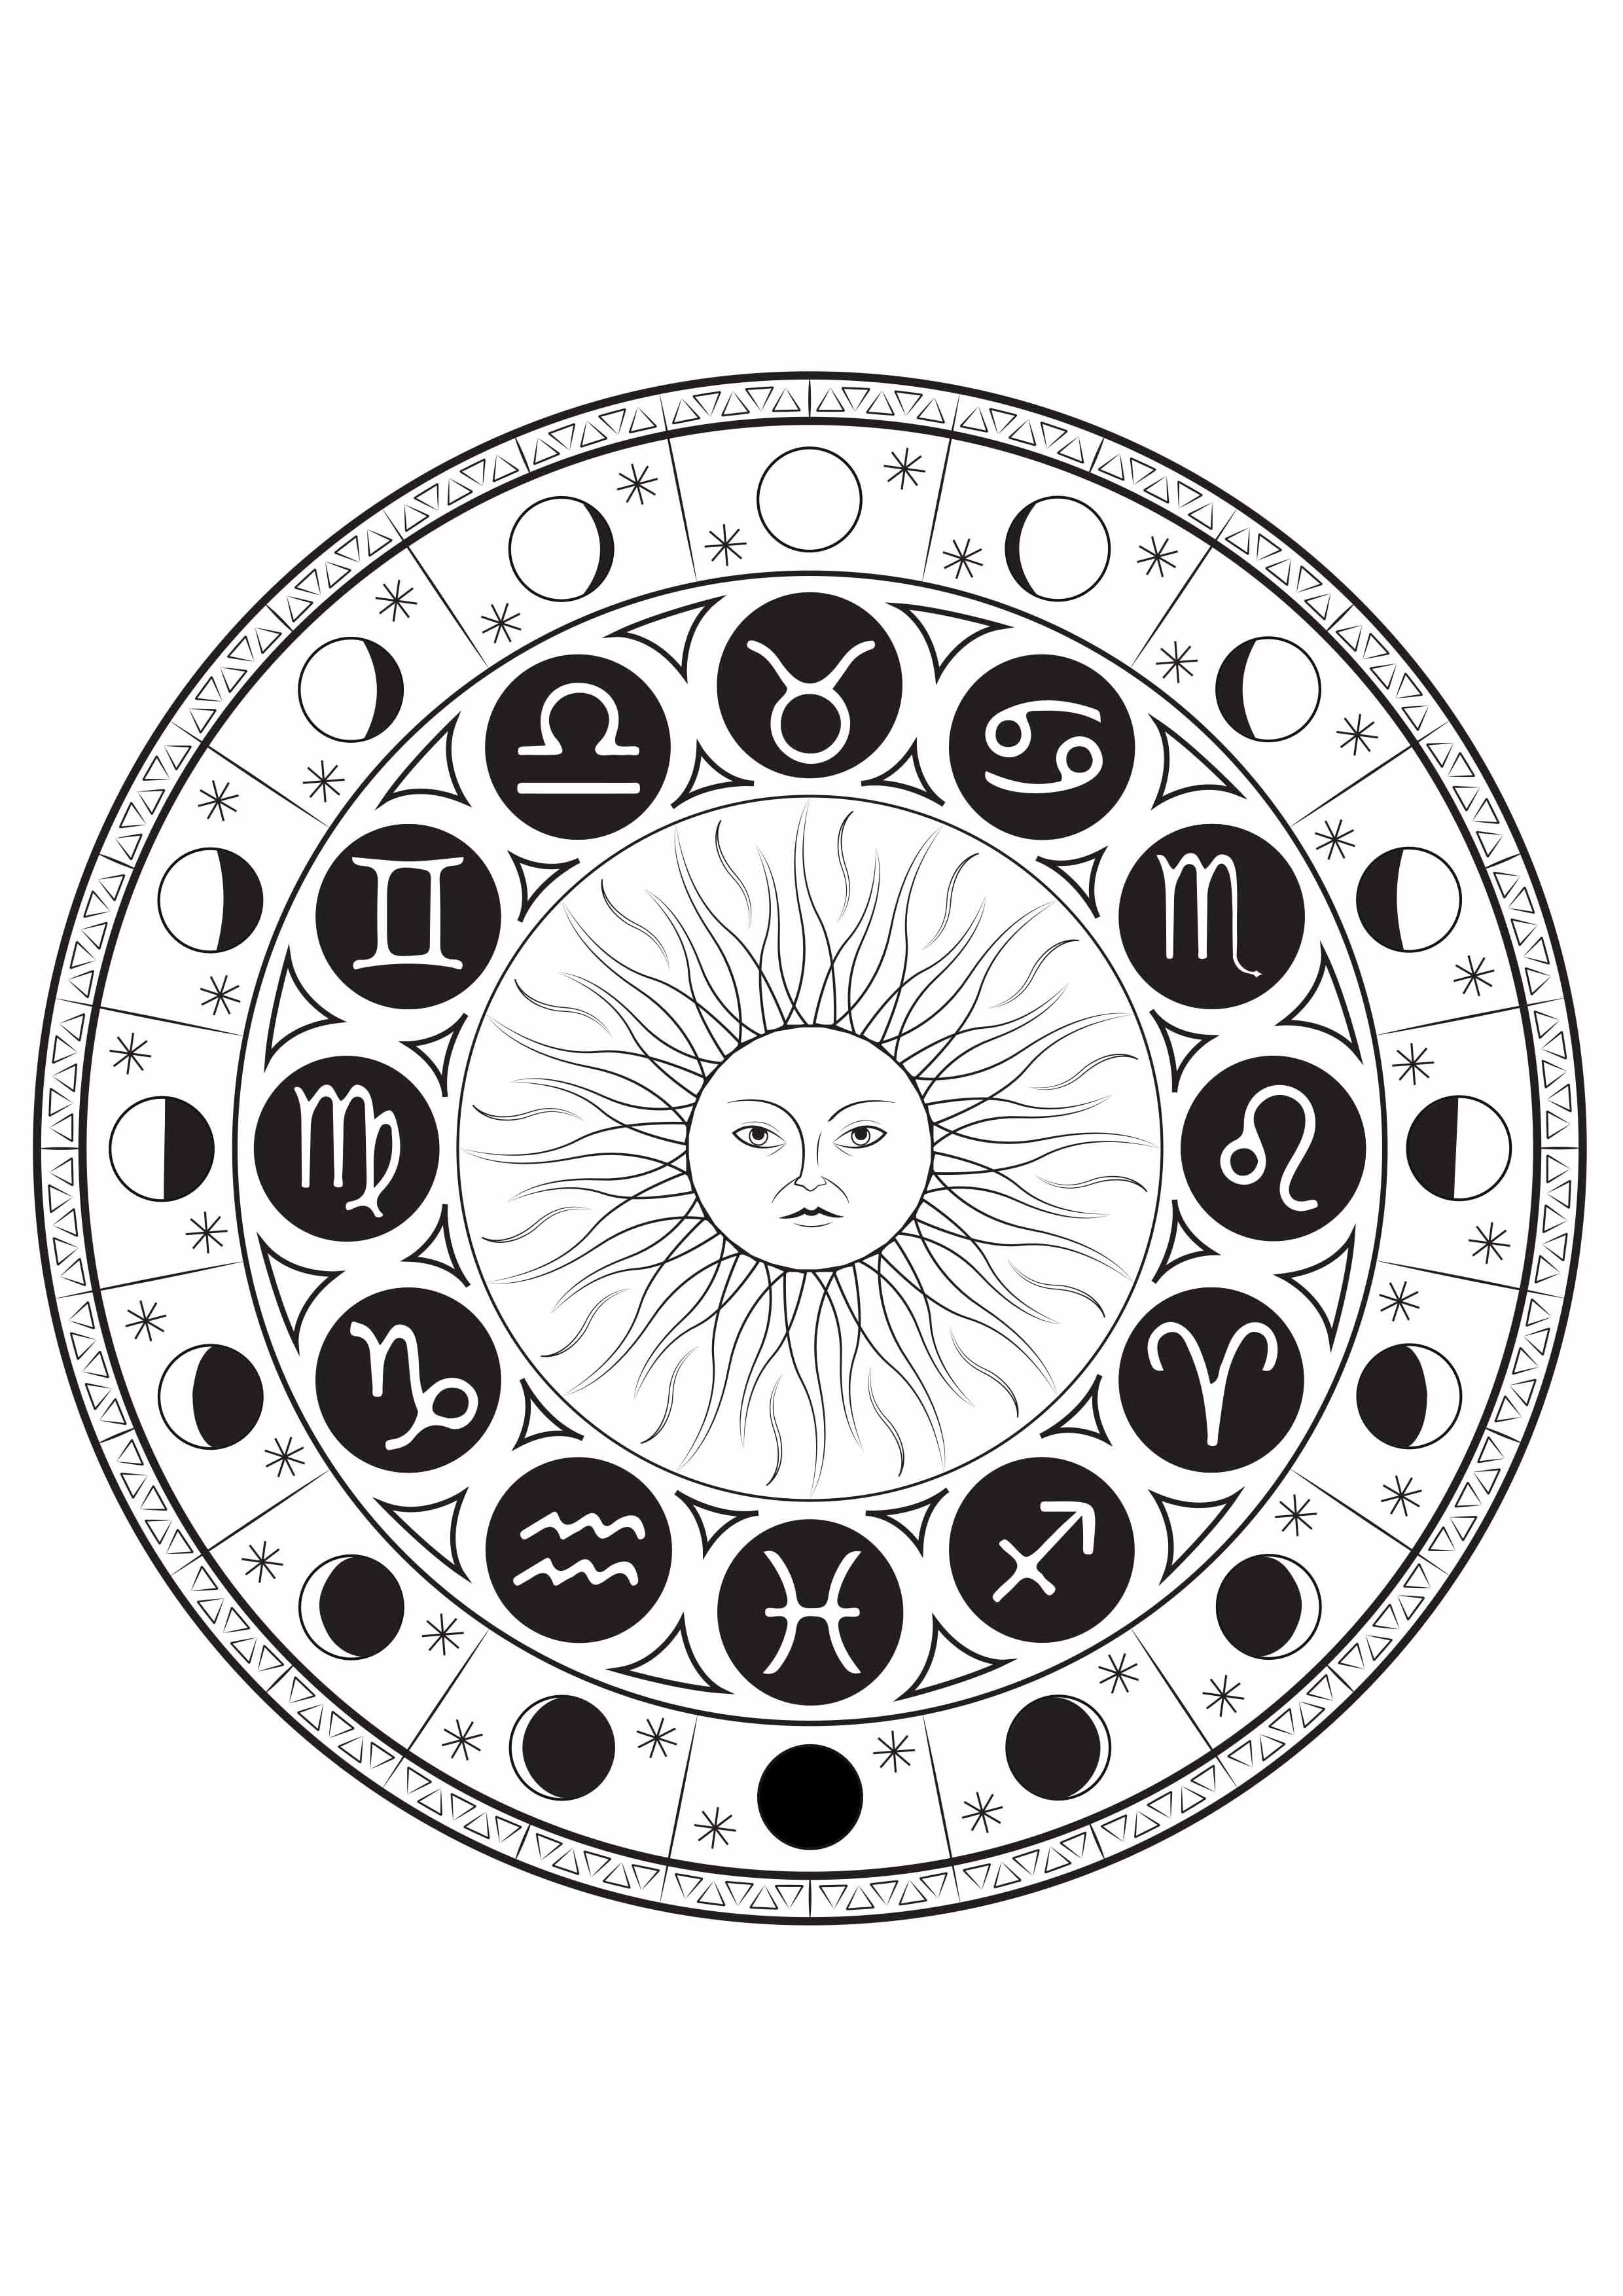 Astrological signs mandala by louise